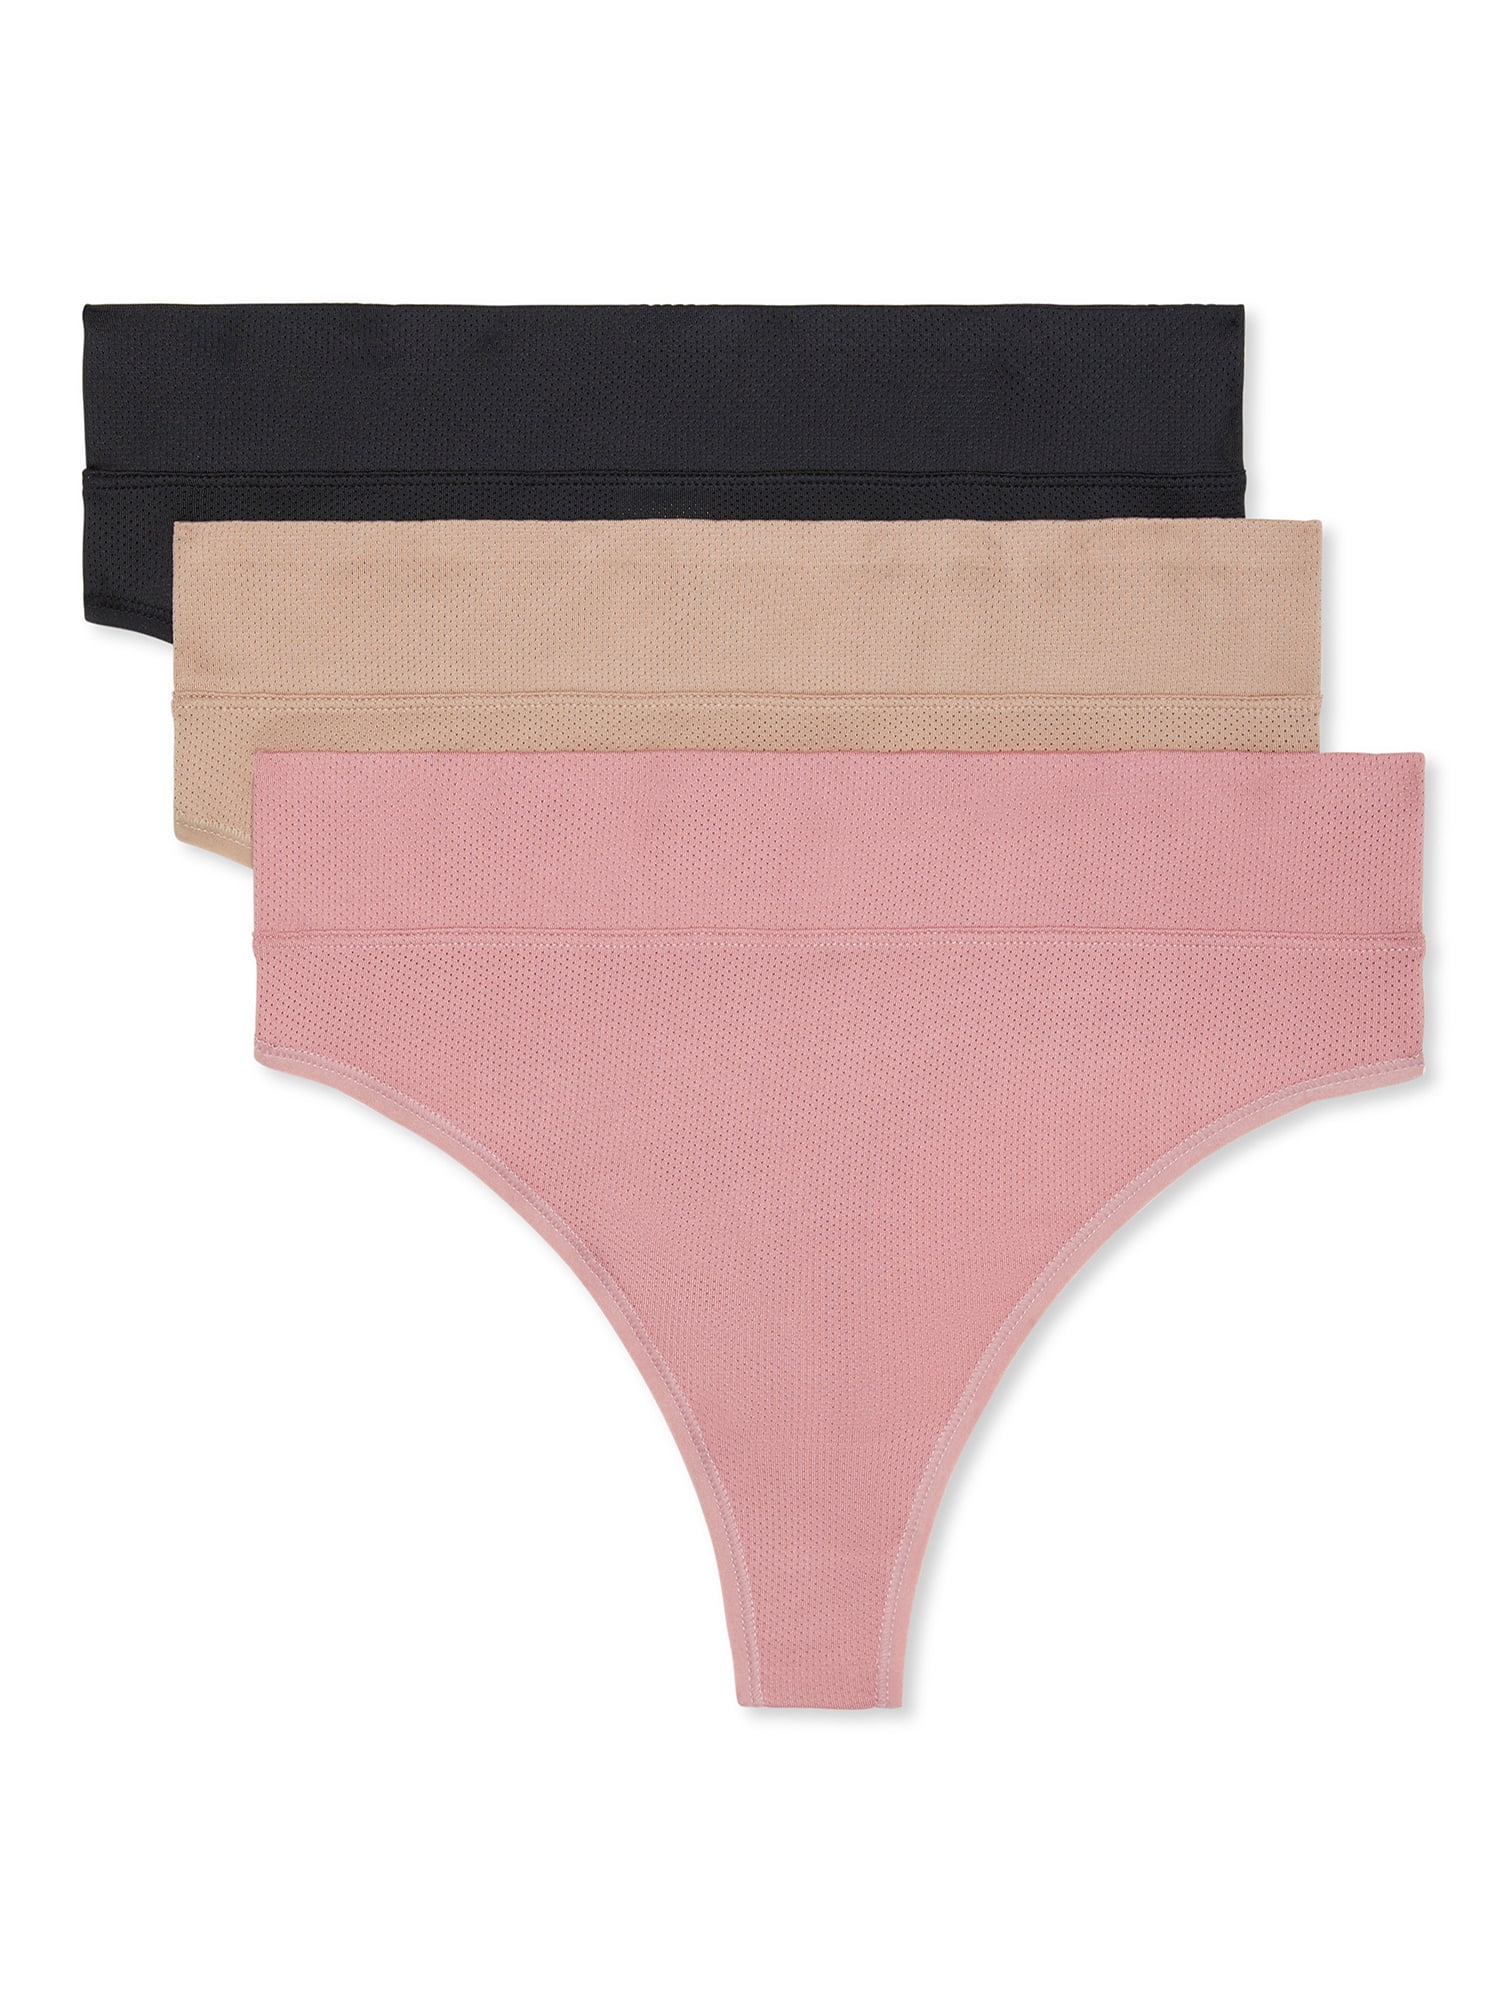 Warners® Blissful Benefits Moisture-Wicking Thong 3-Pack RX4963W 